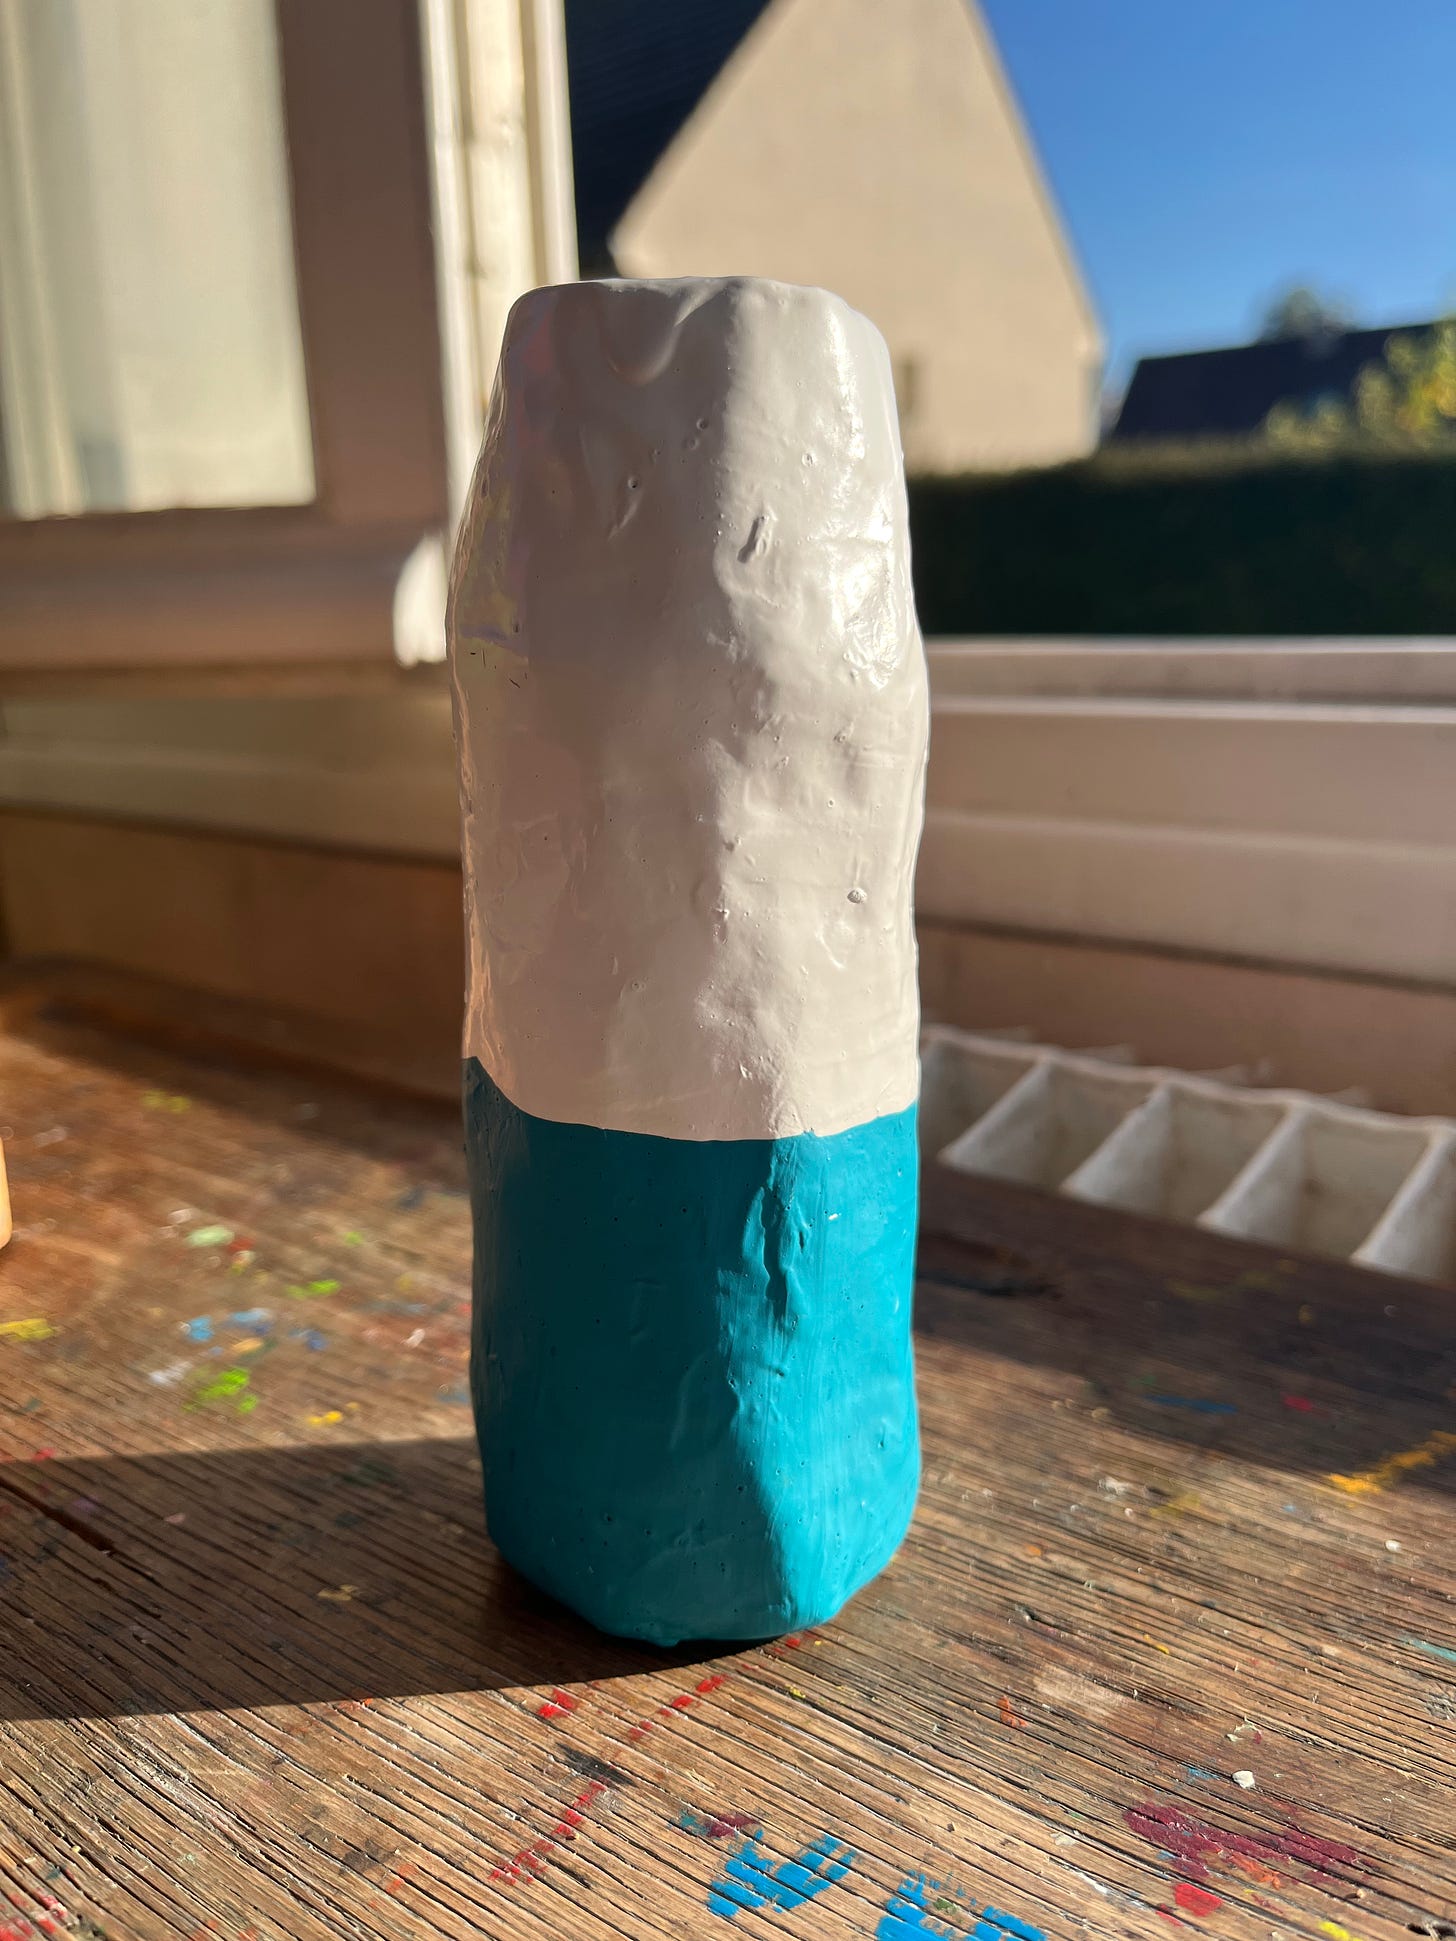 A paper mache bottle in white and blue